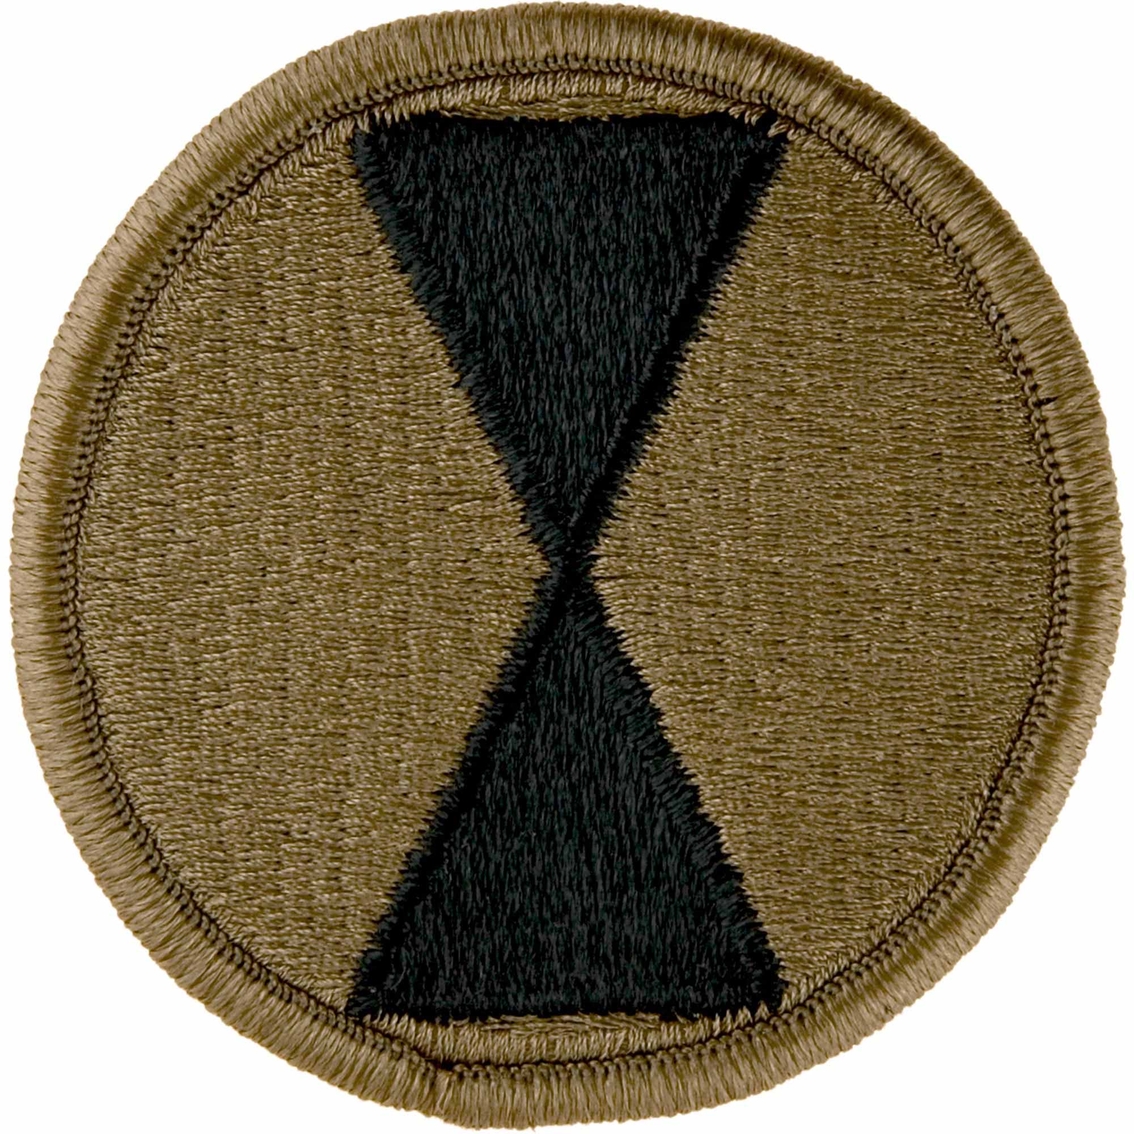 Army Infantry Patches - Army Military